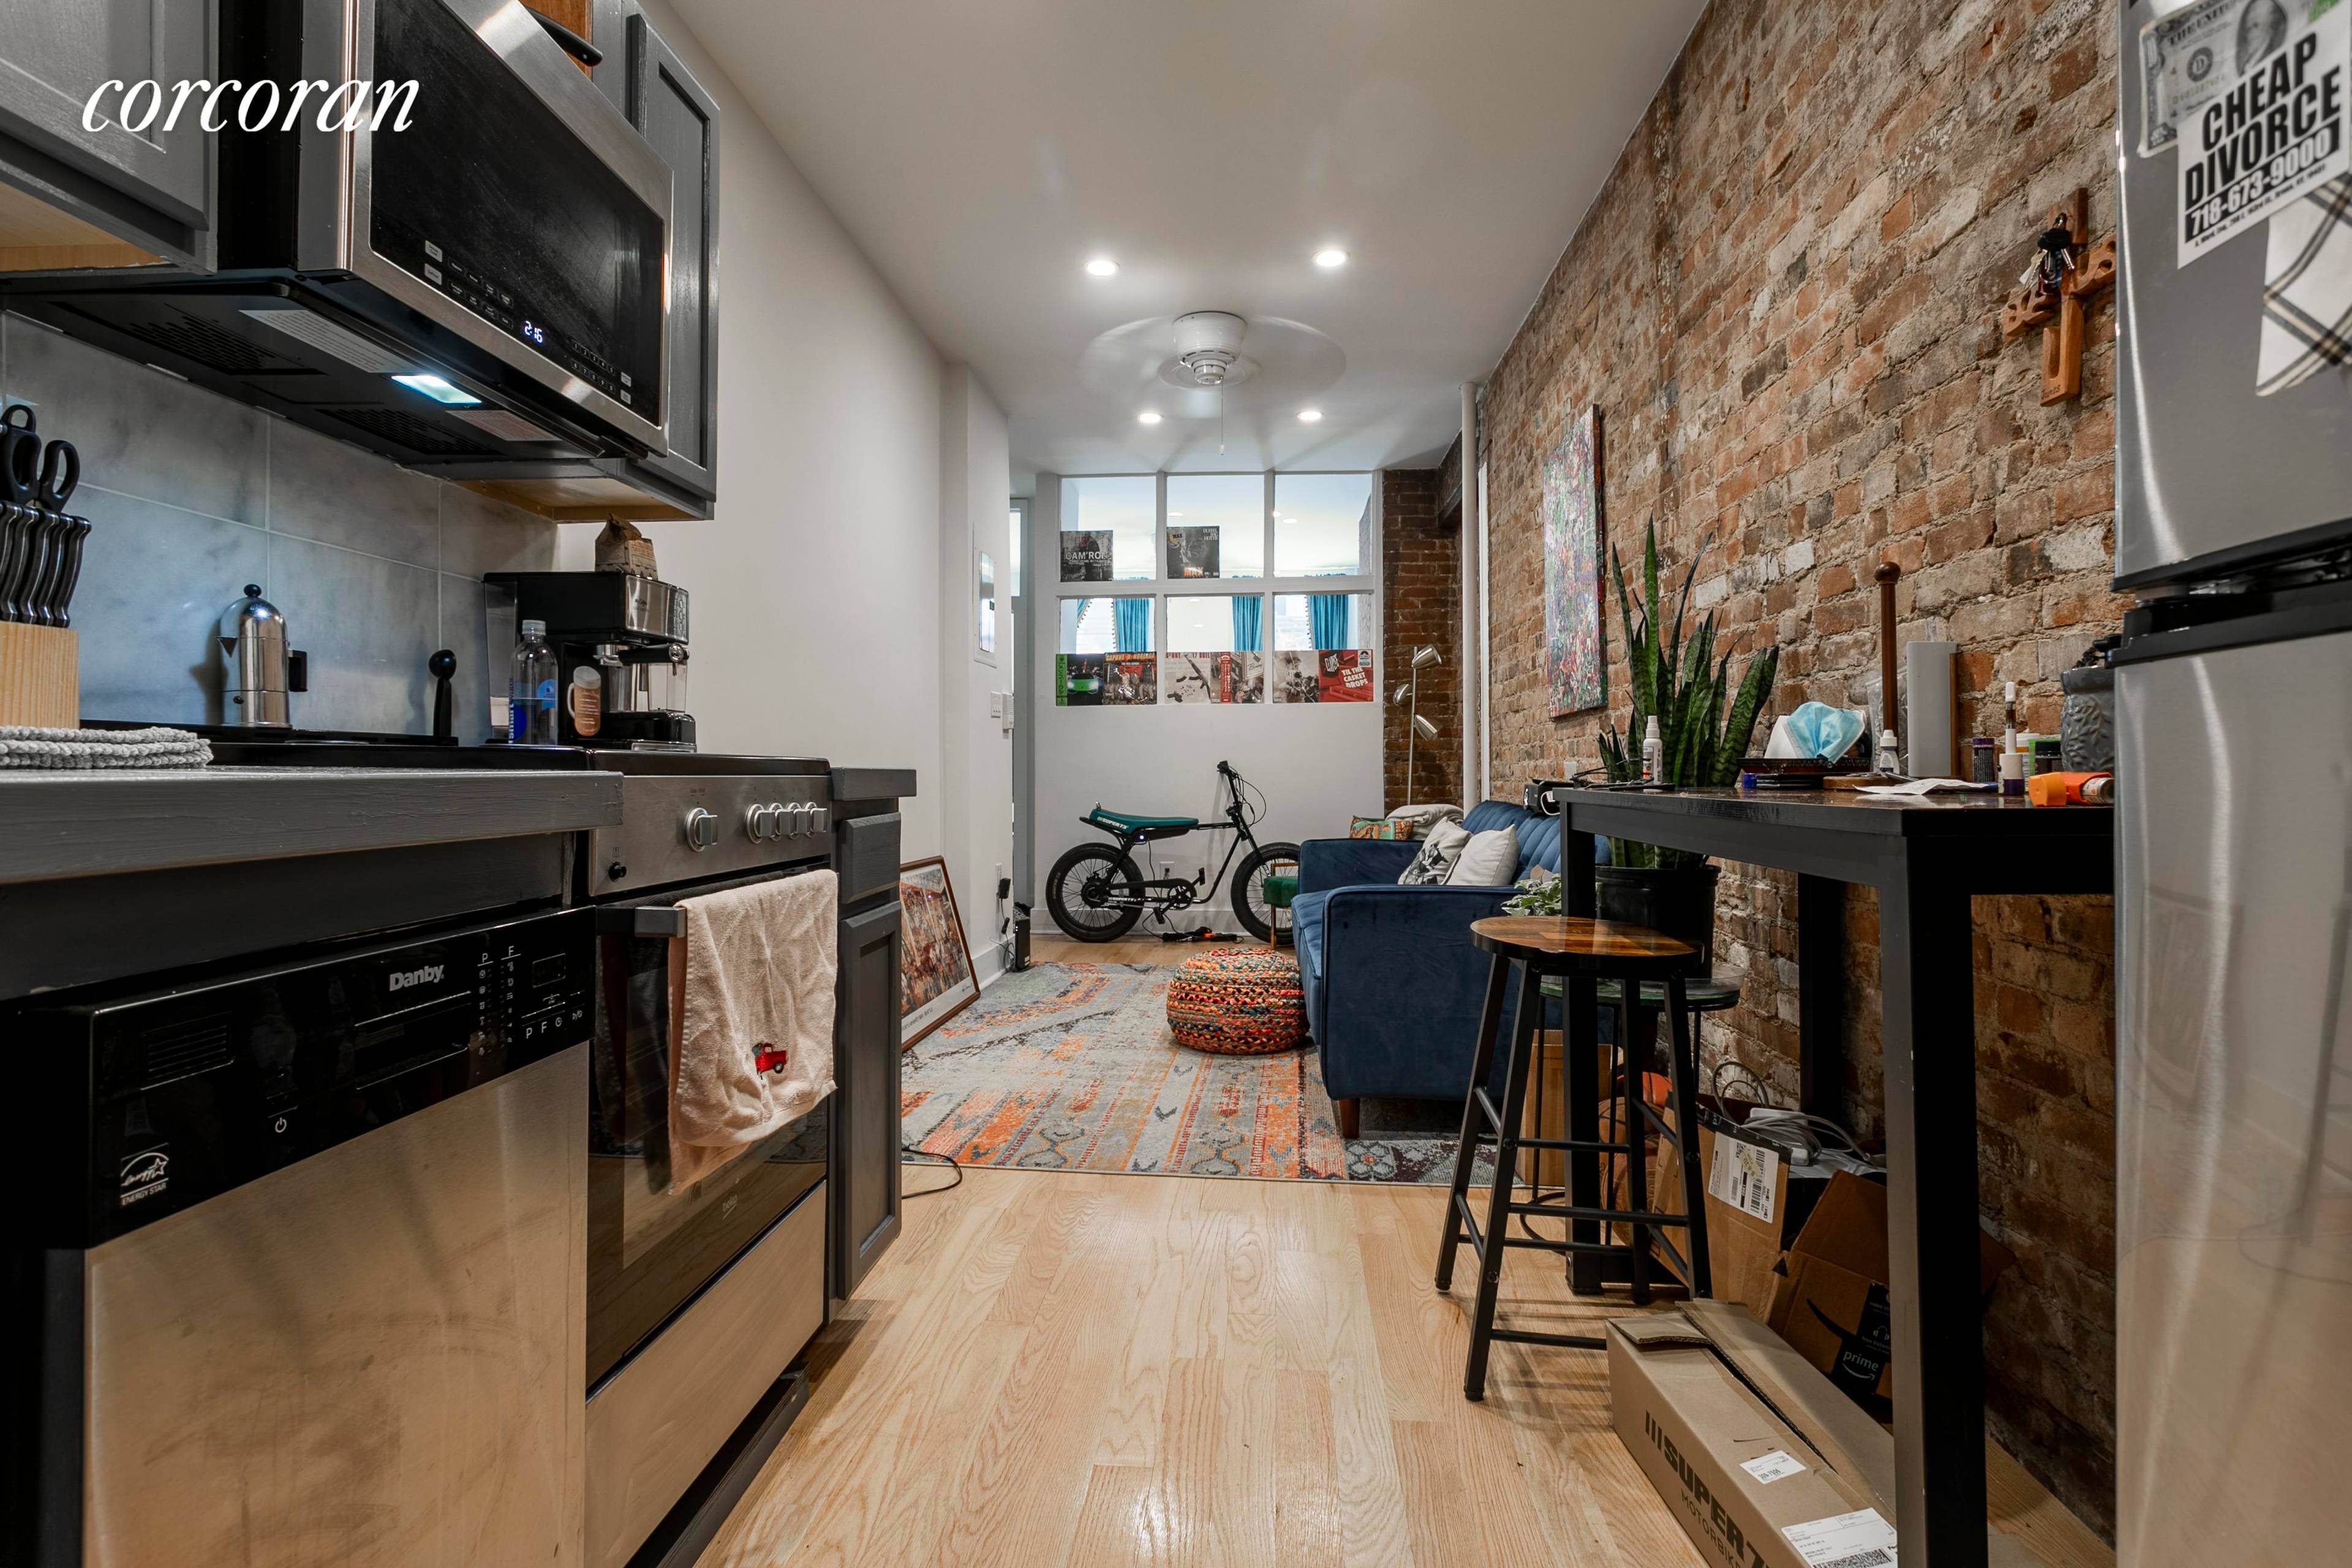 NO FEE SPECTACULAR GUT RENOVATED LOFTY 2 BR IN WBURG !